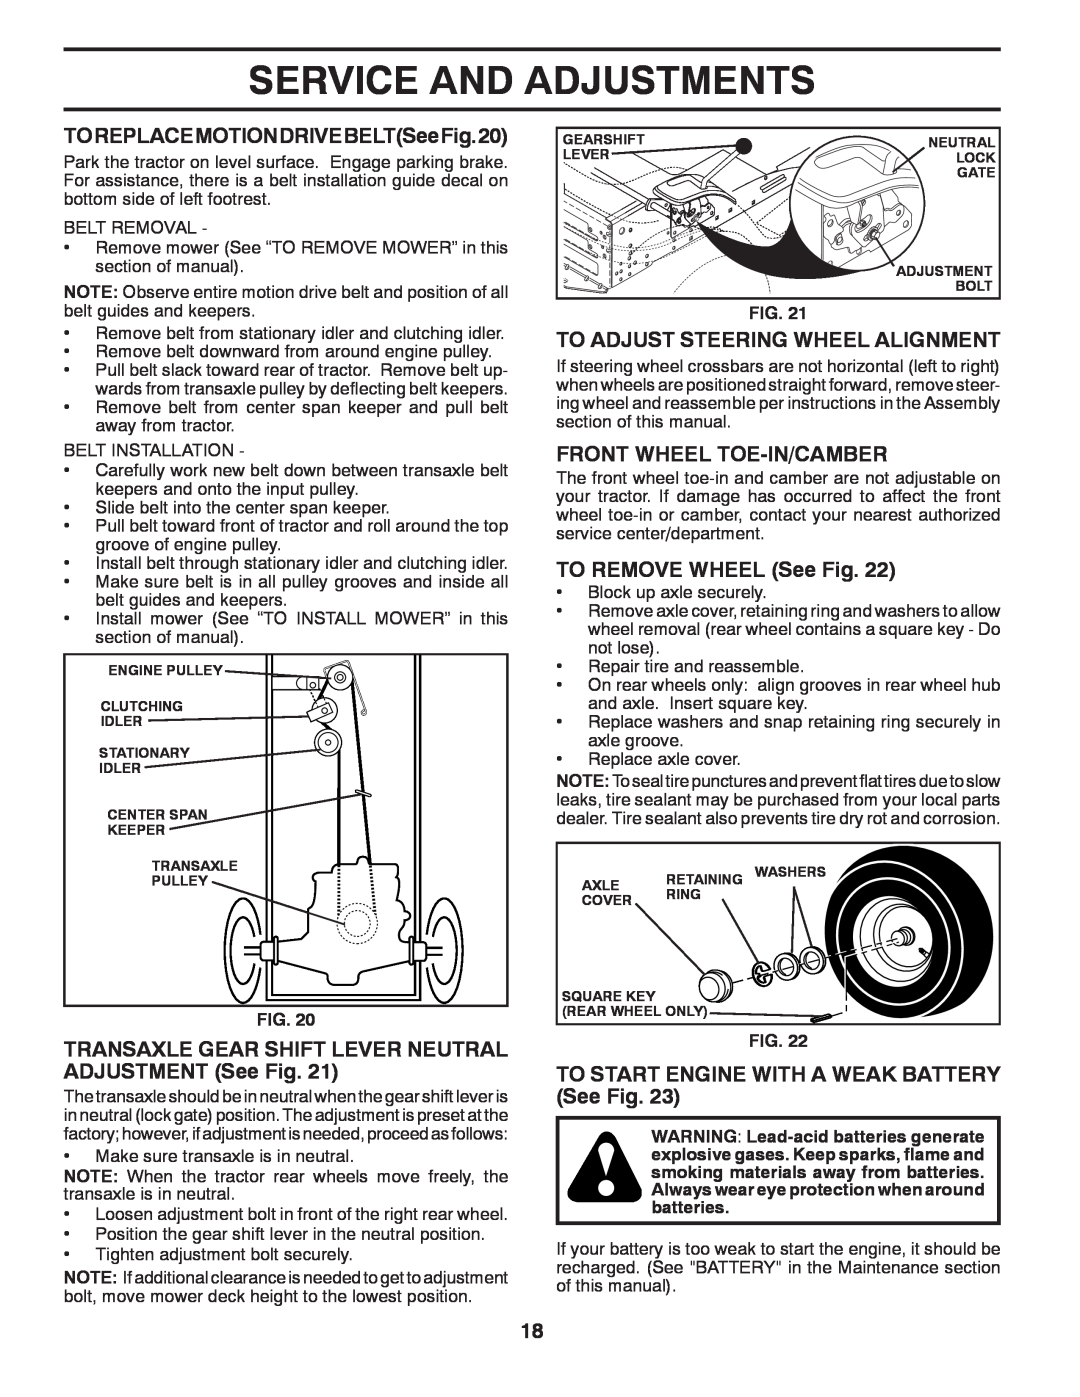 Poulan 424634 manual TOREPLACEMOTIONDRIVEBELTSeeFig.20, To Adjust Steering Wheel Alignment, Front Wheel Toe-In/Camber 